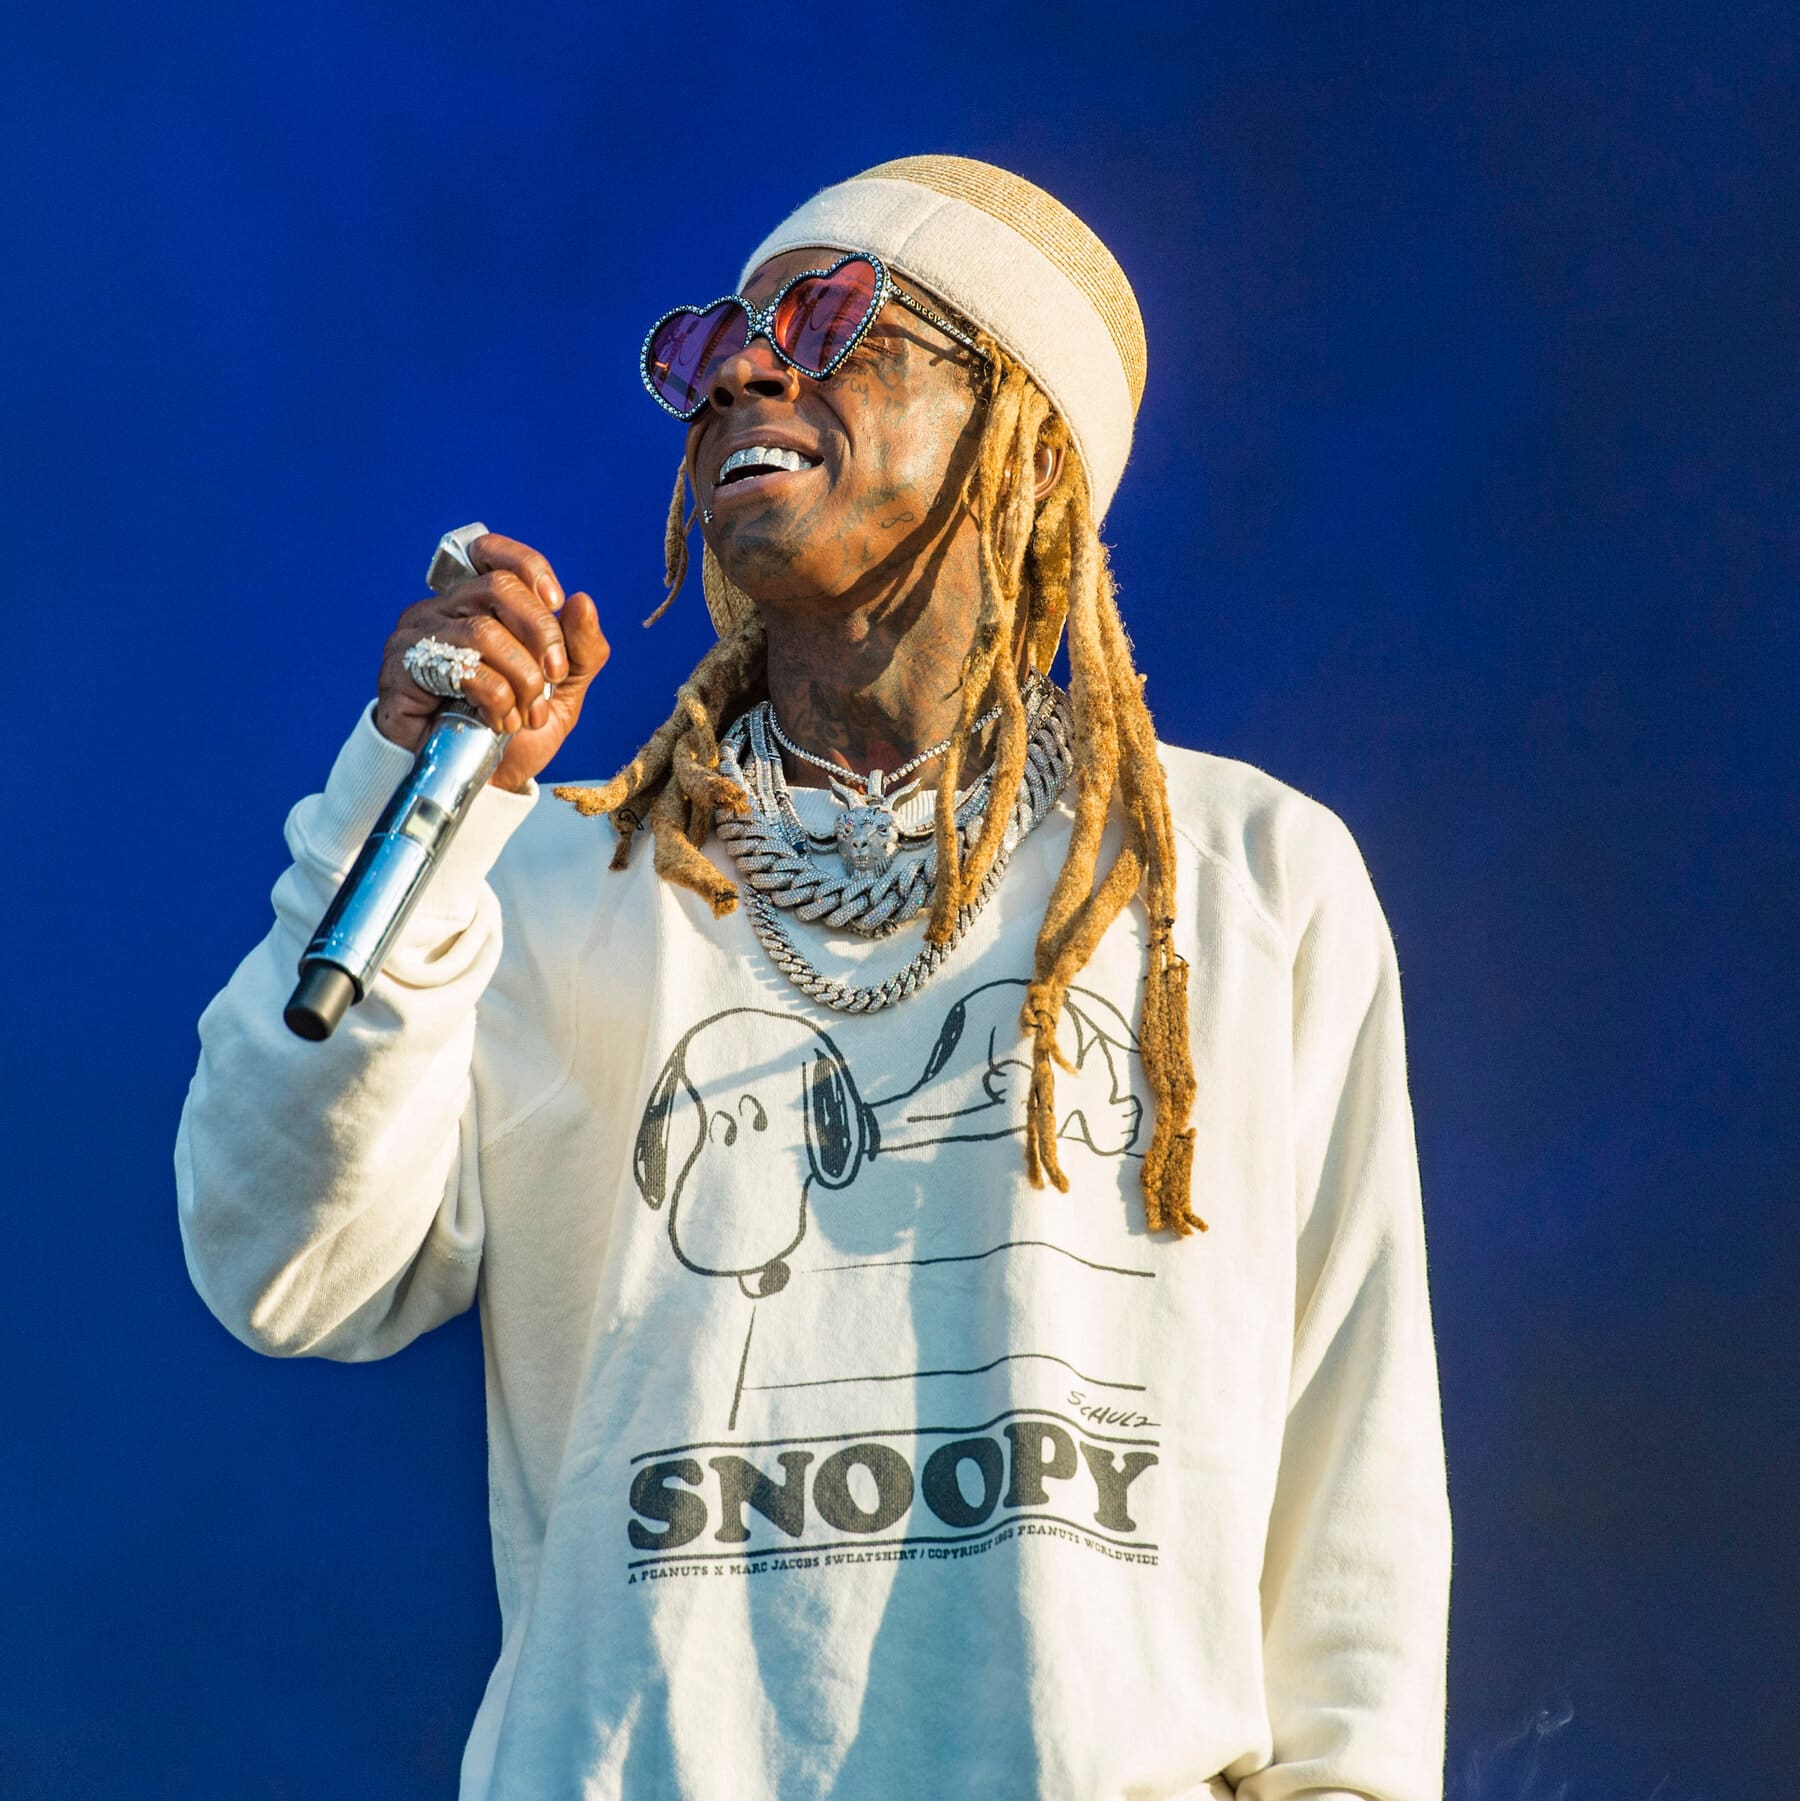 lil-wayne-is-involved-in-a-new-scandal-check-out-more-details